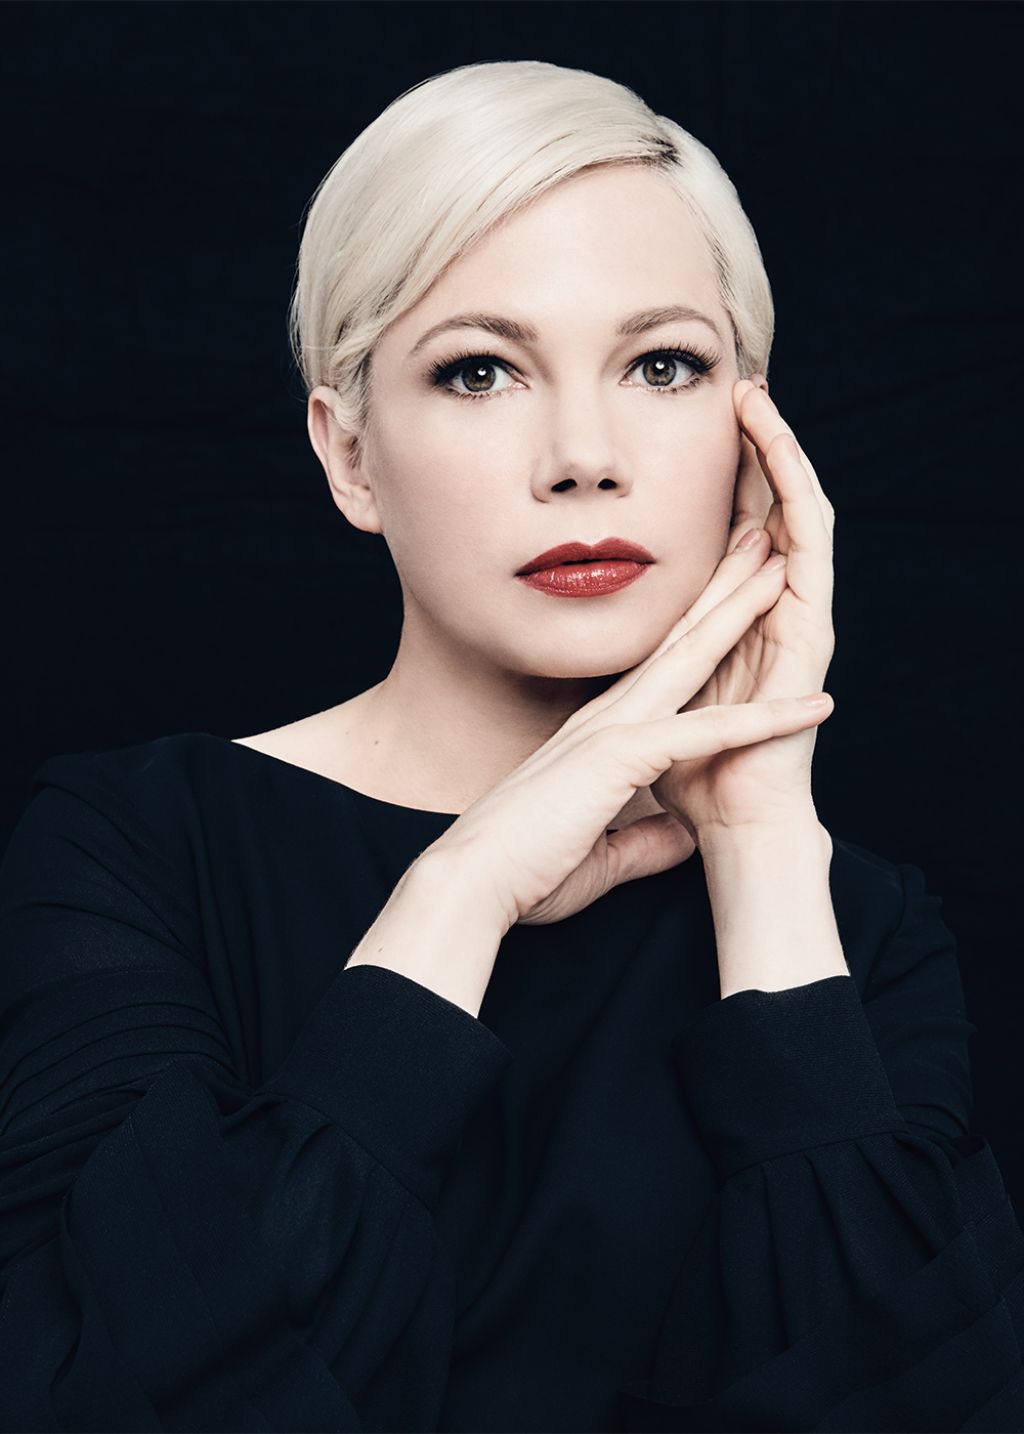 Michelle Williams Variety’s Emmy Portrait Photographed (2019